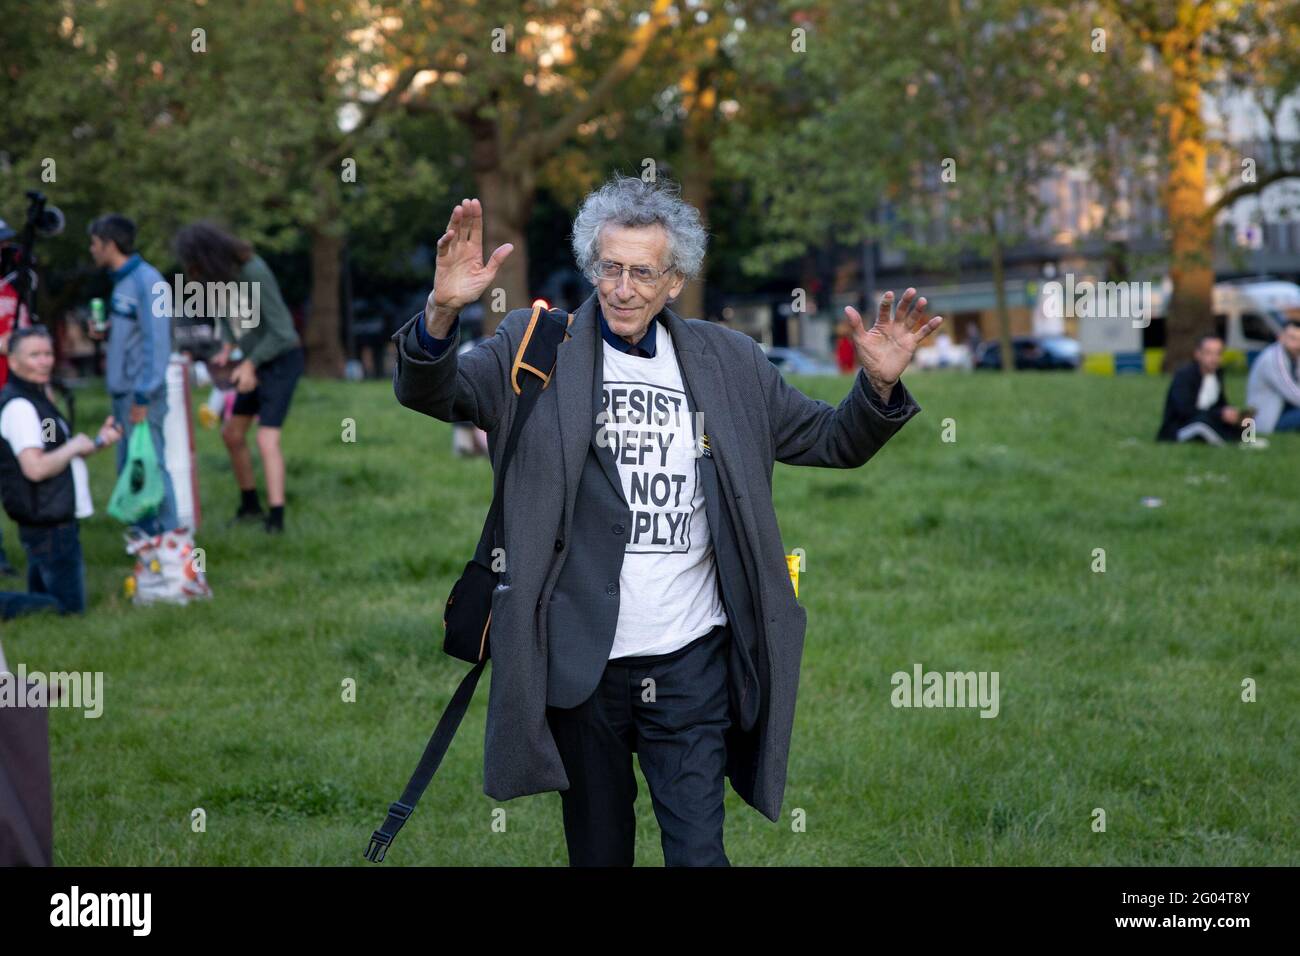 London, UK. 31st May 2021. Piers Corbyn arrives to support the crowd of protesters. Yuen Ching Ng/Alamy Live News Stock Photo